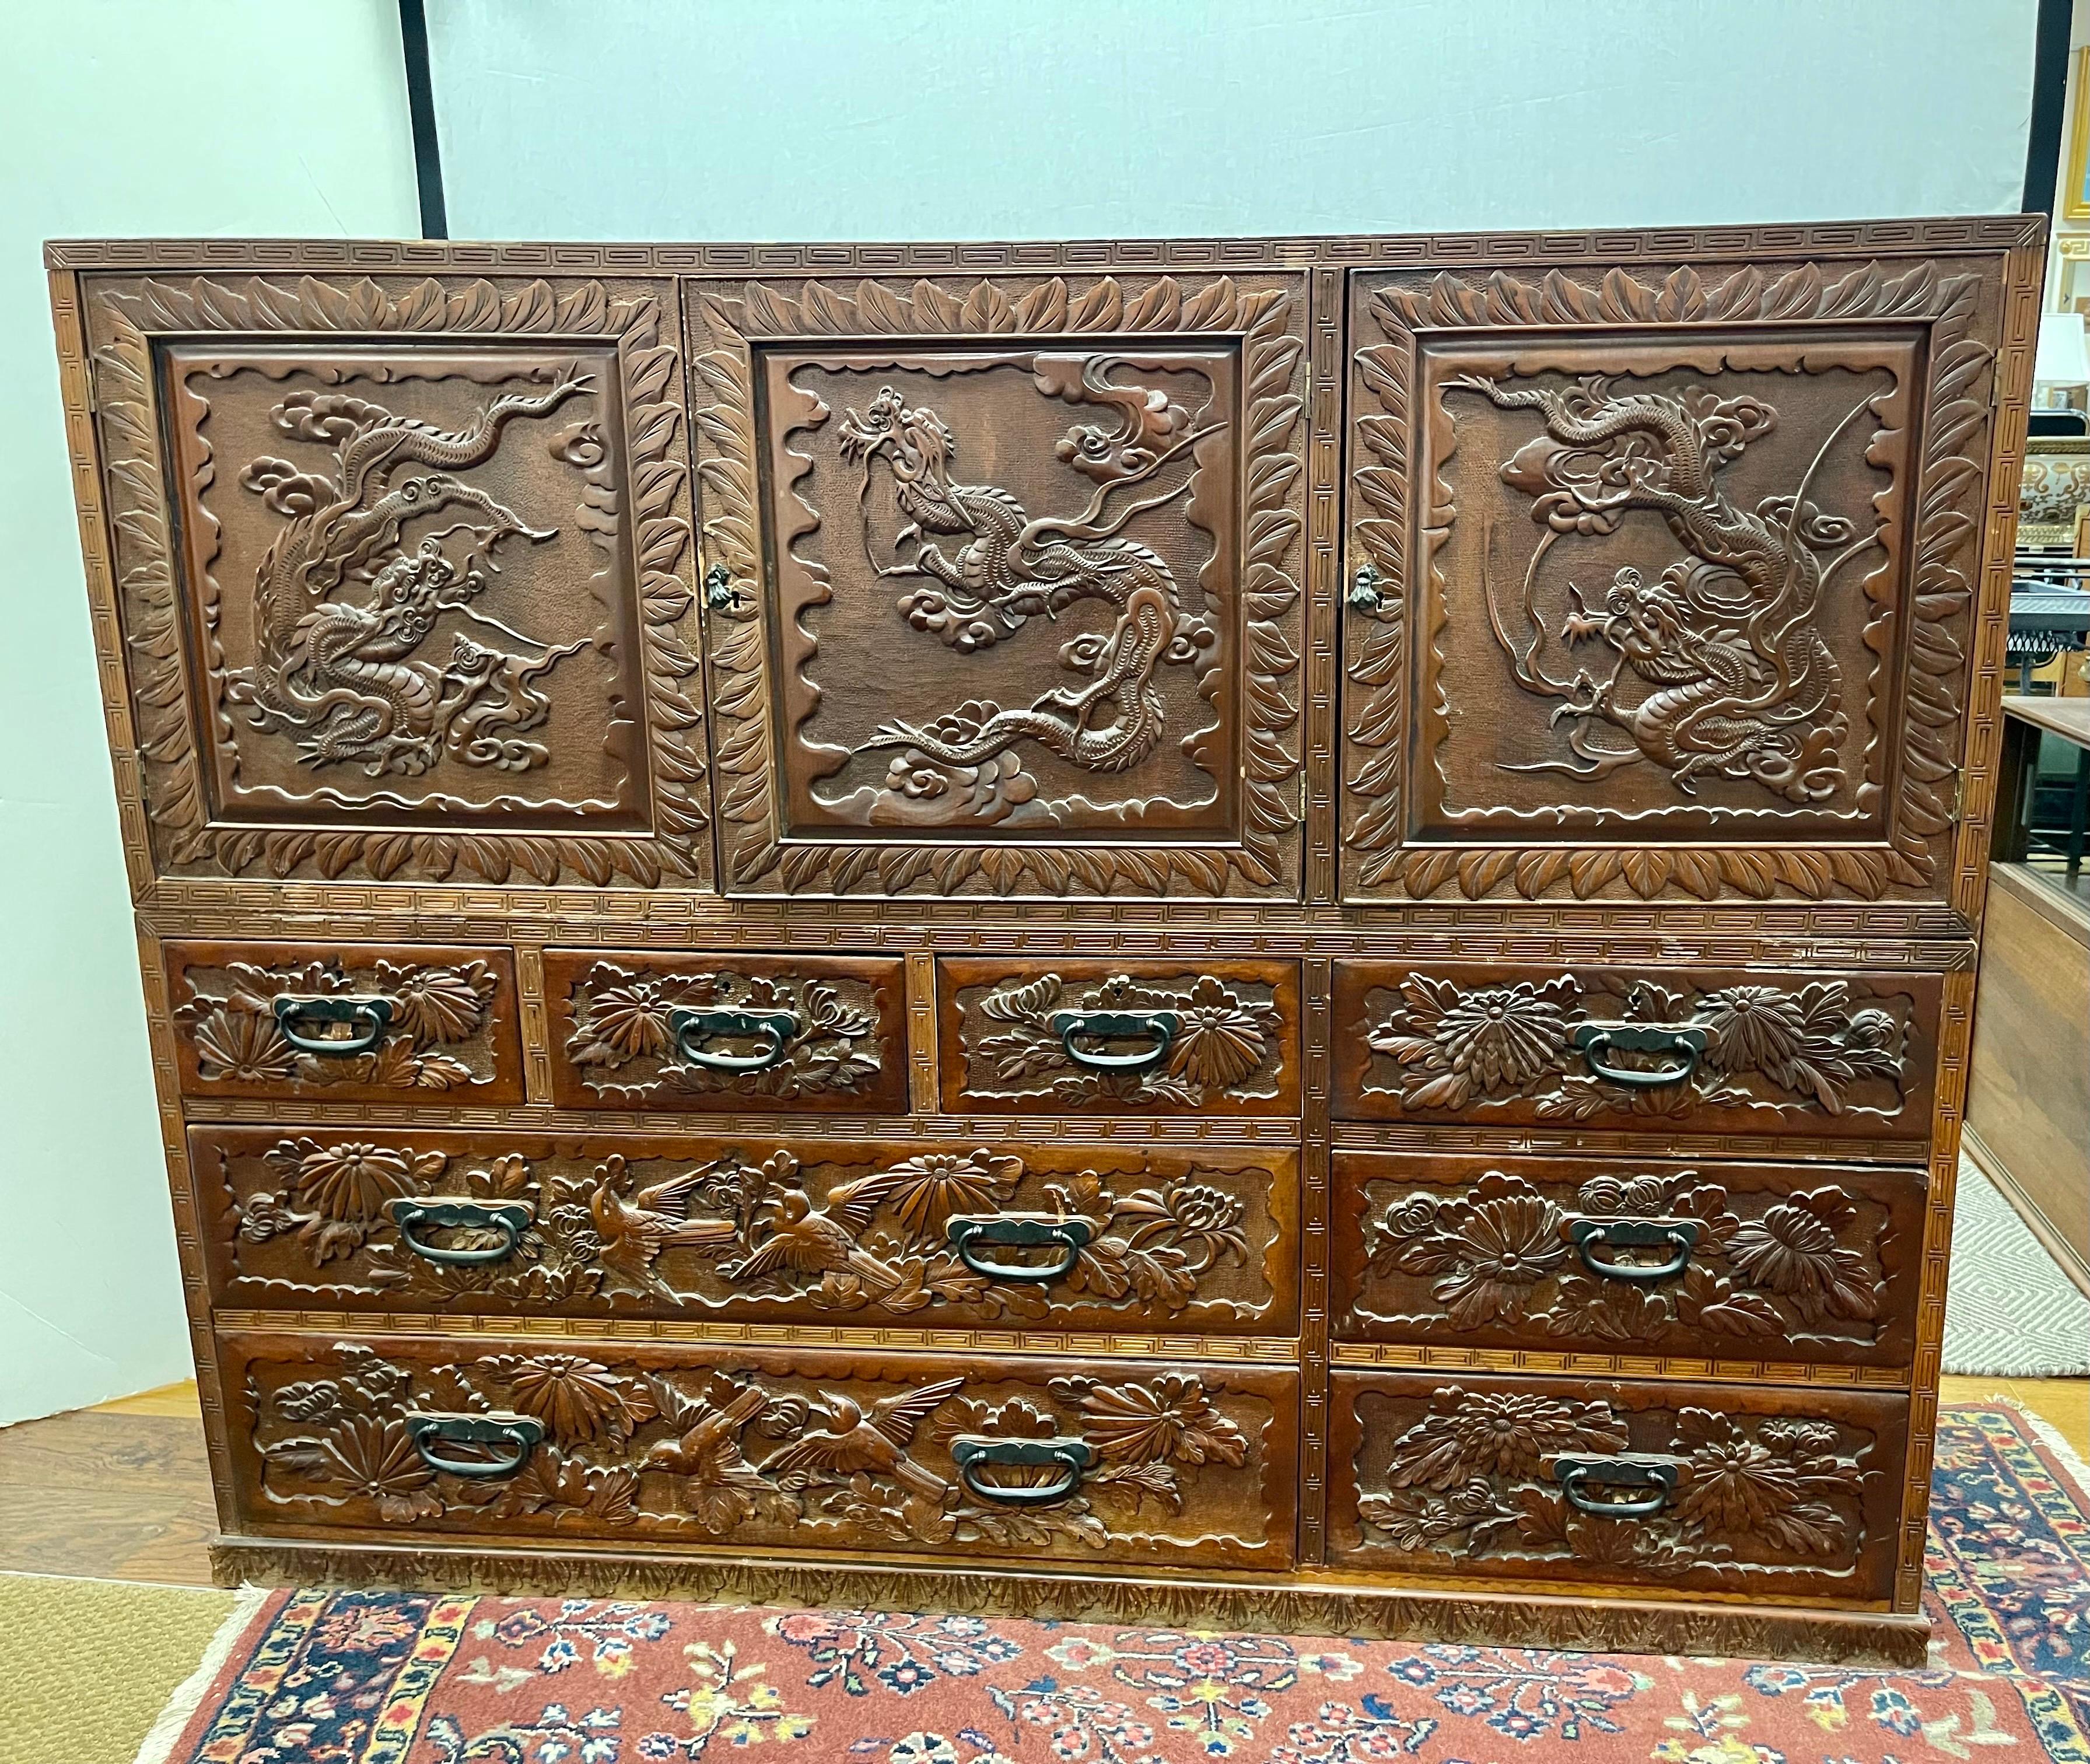 A stunning turn of the century two piece Chinese cabinet featuring a top and bottom. The carvings are throughout and richly detailed. There are multiple drawers and compartments throughout. The top piece fits nicely right on top of the bottom piece.